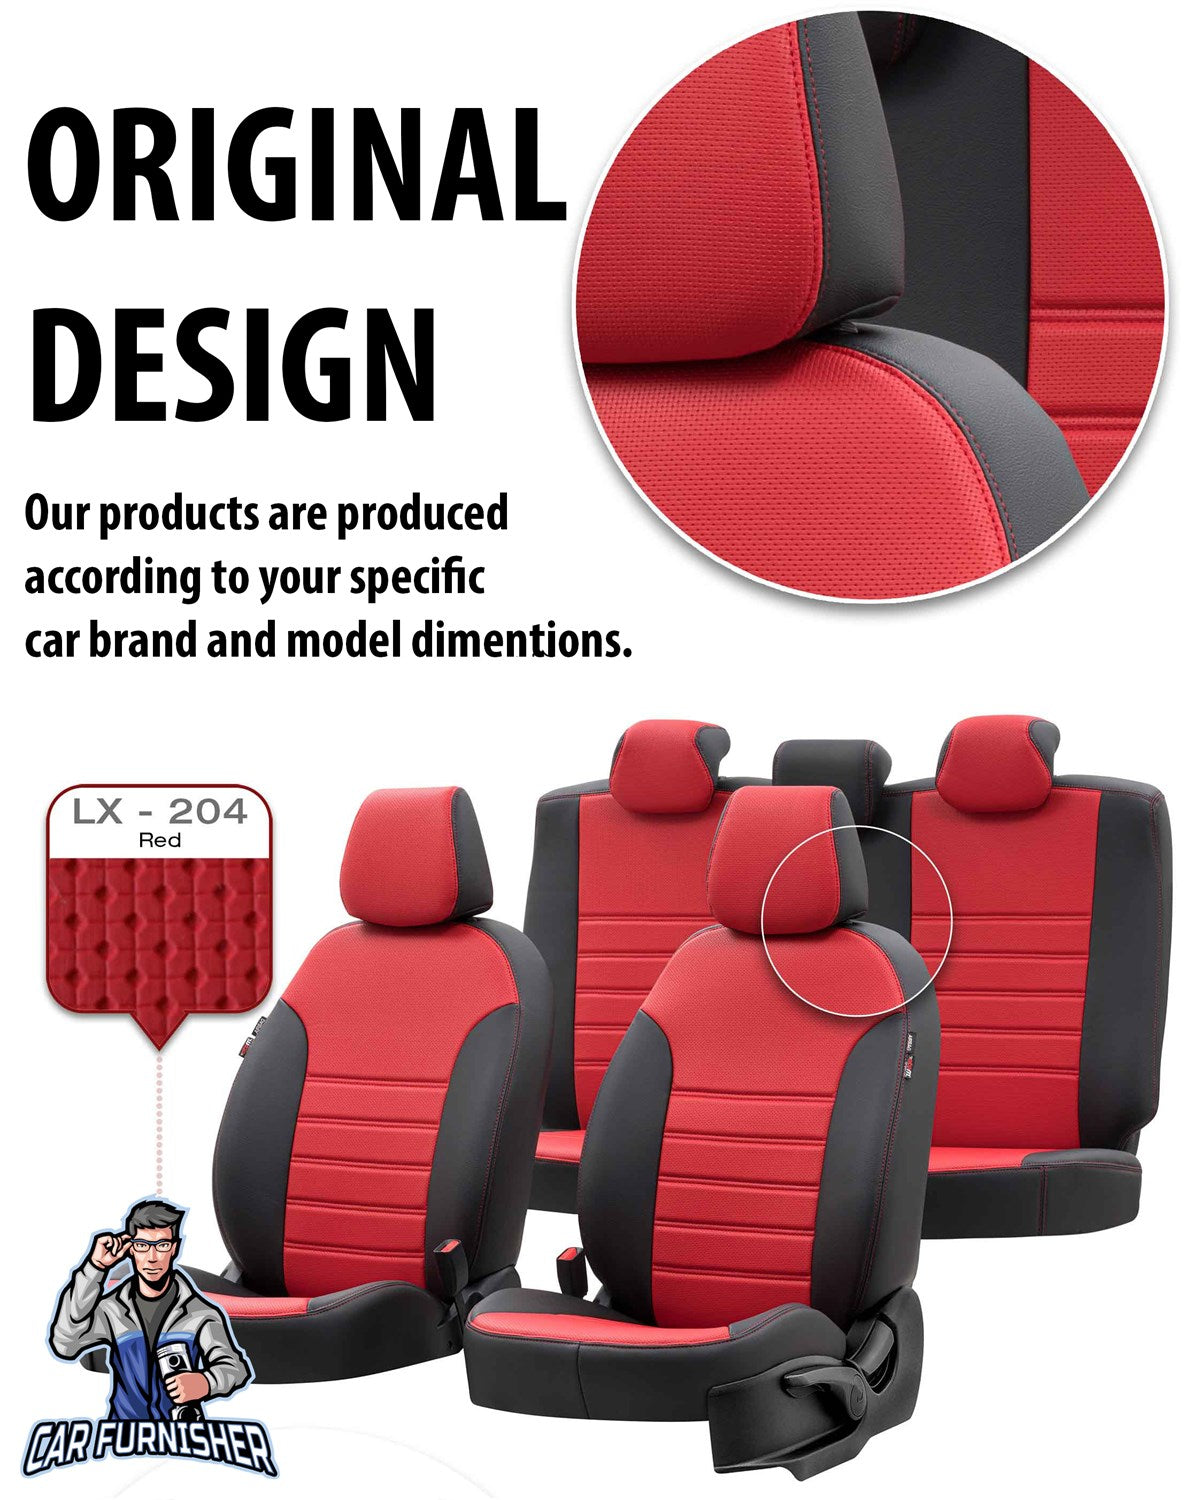 Mercedes X-Class Seat Covers New York Leather Design Ivory Leather